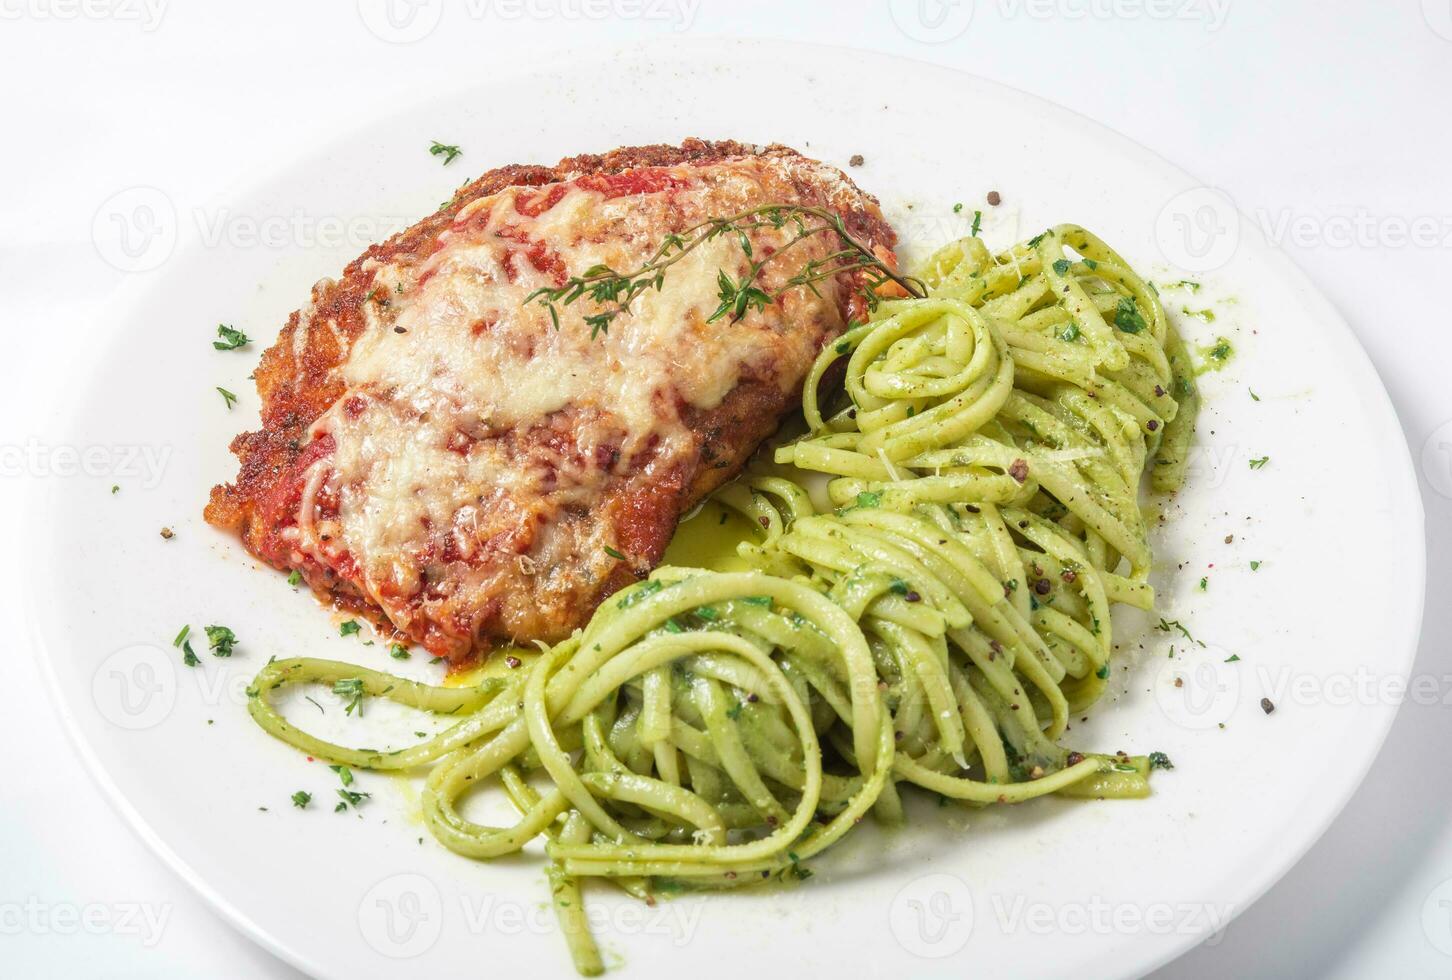 Chicken with parmesan cheese and linguine pasta in pesto sauce photo